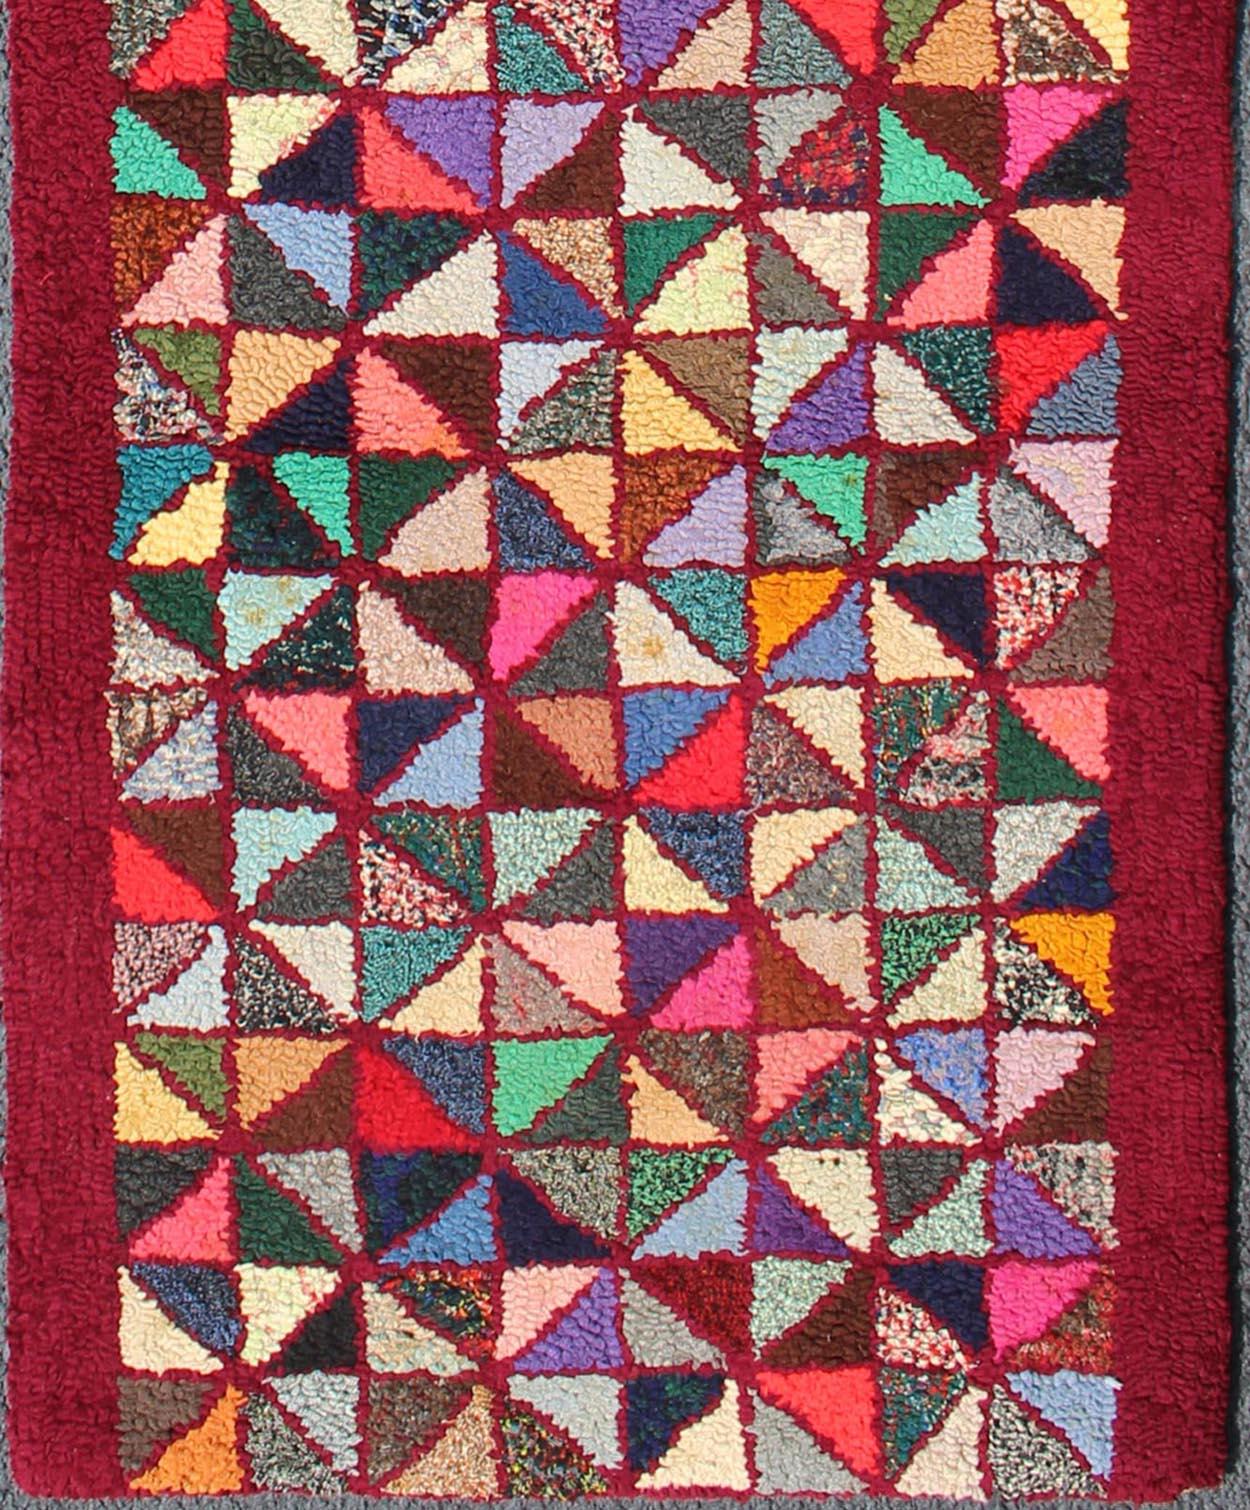 Wool Checkerboard Vintage American Hooked Rug with Geometric Design in Multi Colors For Sale